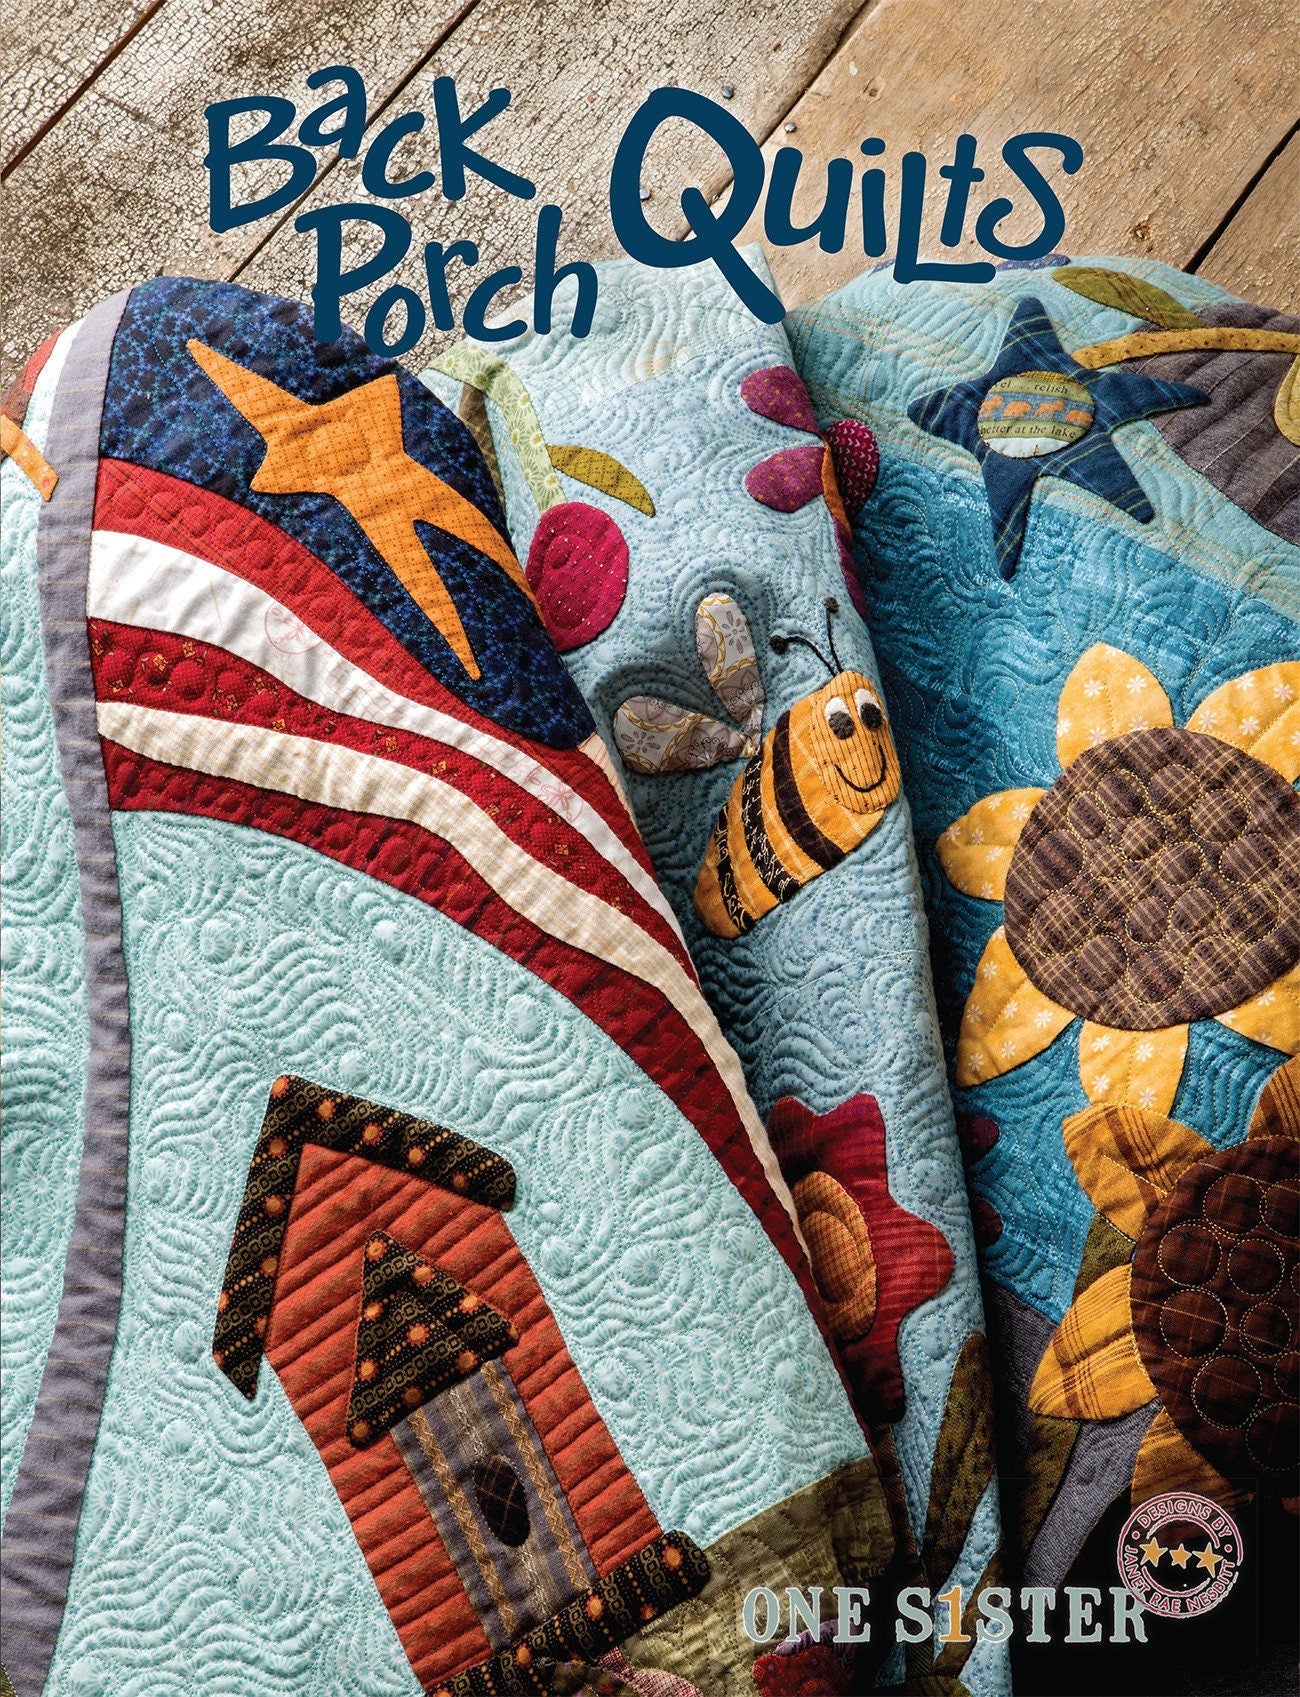 Back Porch Quilts Quilt Pattern Book by Janet Nesbitt of One Sister Designs